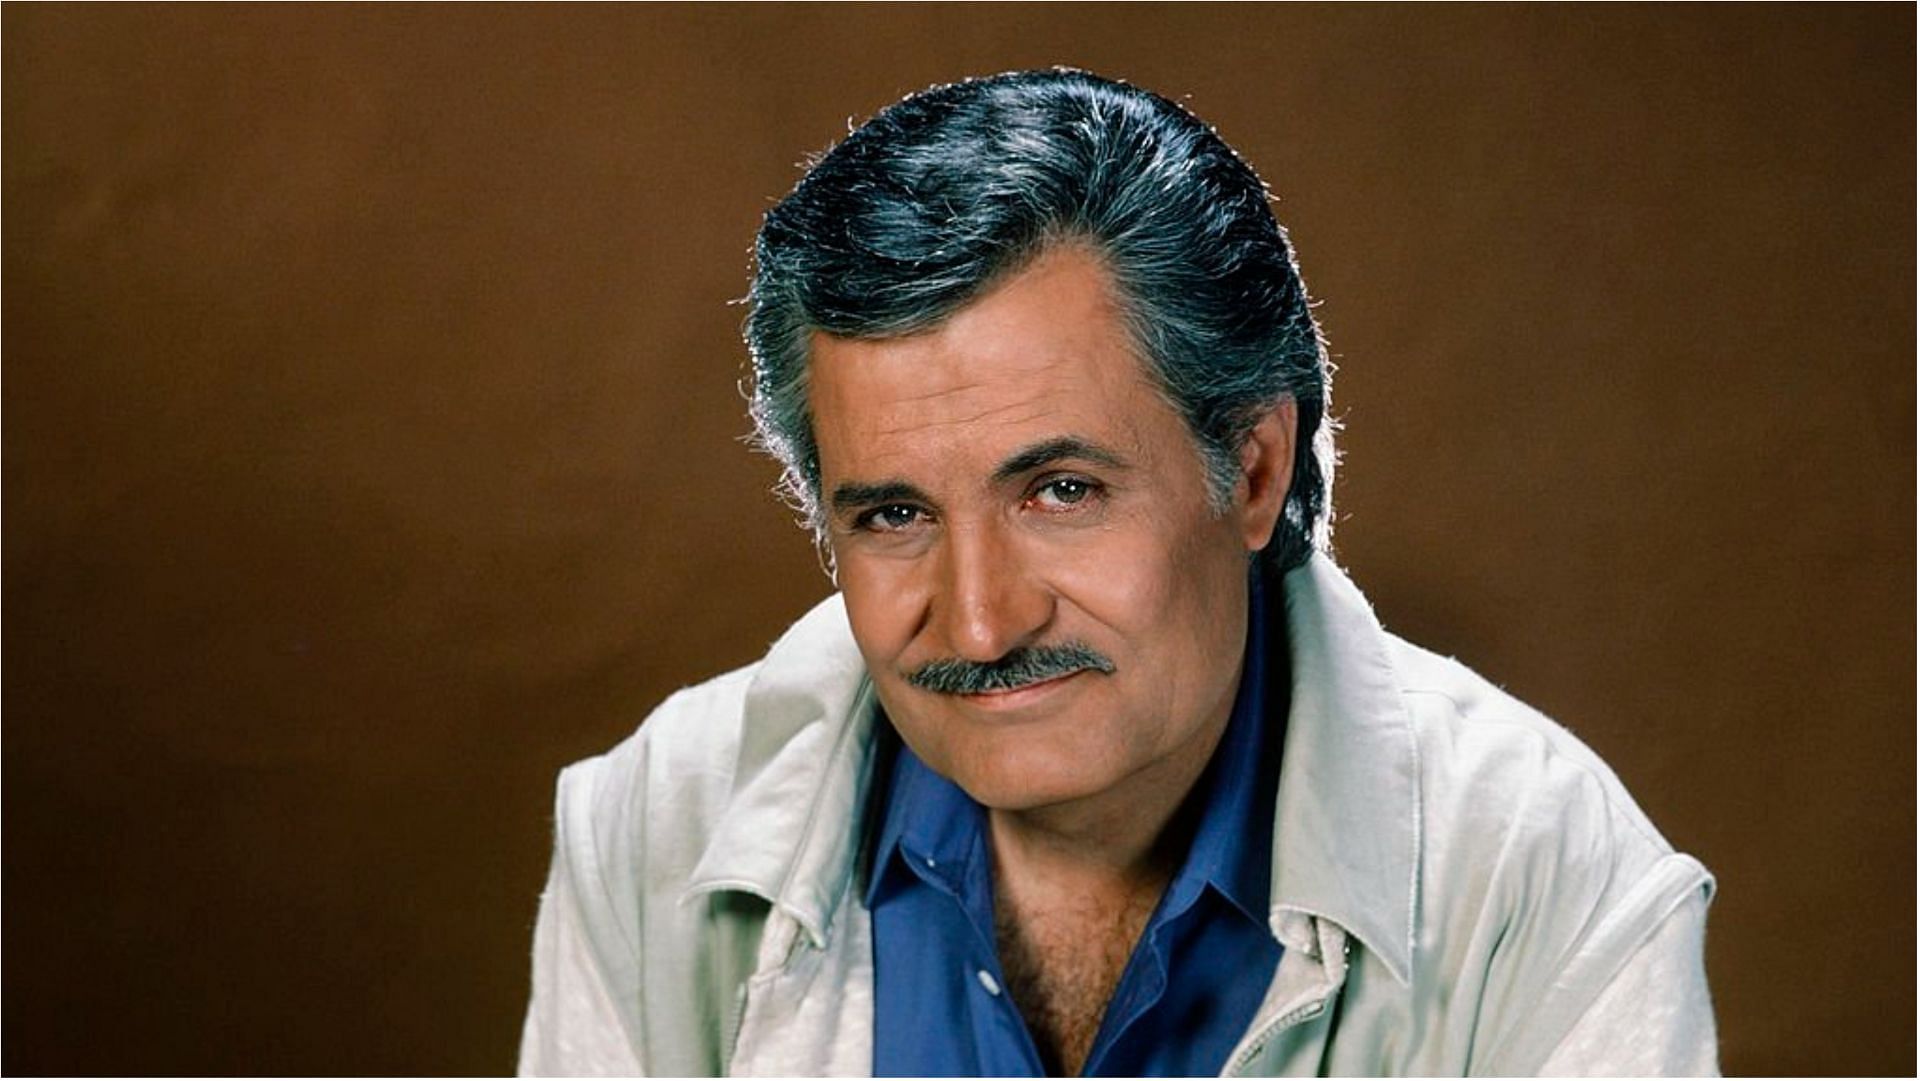 John Aniston gained recognition for his appearances on various TV shows (Image via Frank Carroll/Getty Images)